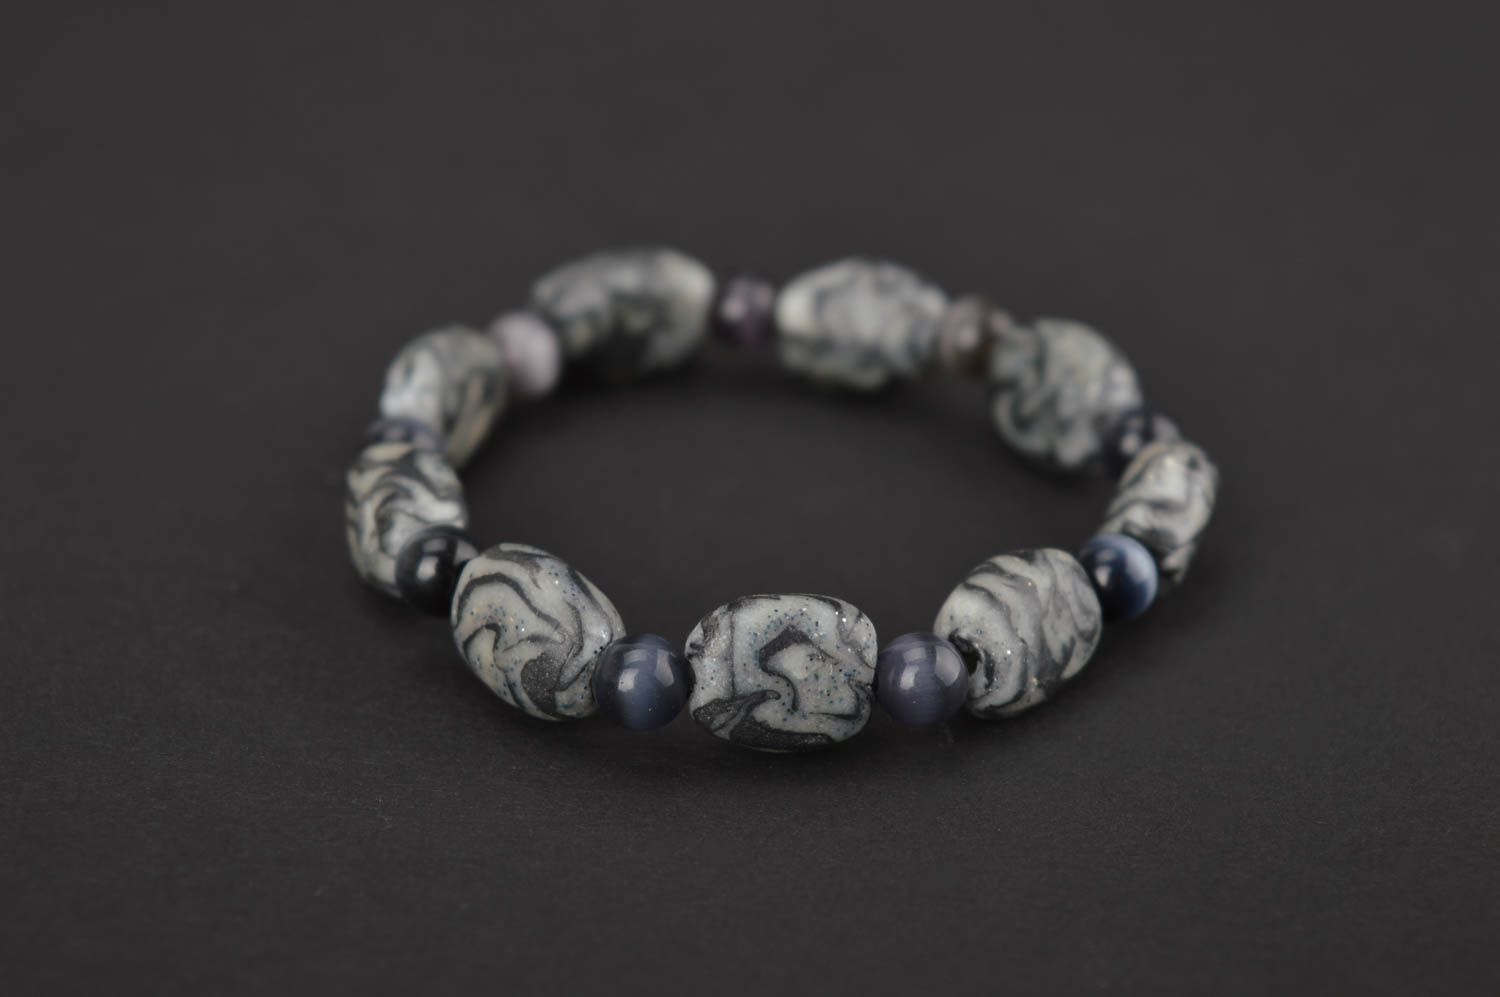 Homemade jewelry polymer clay bead bracelet best gifts for women cool jewelry photo 1